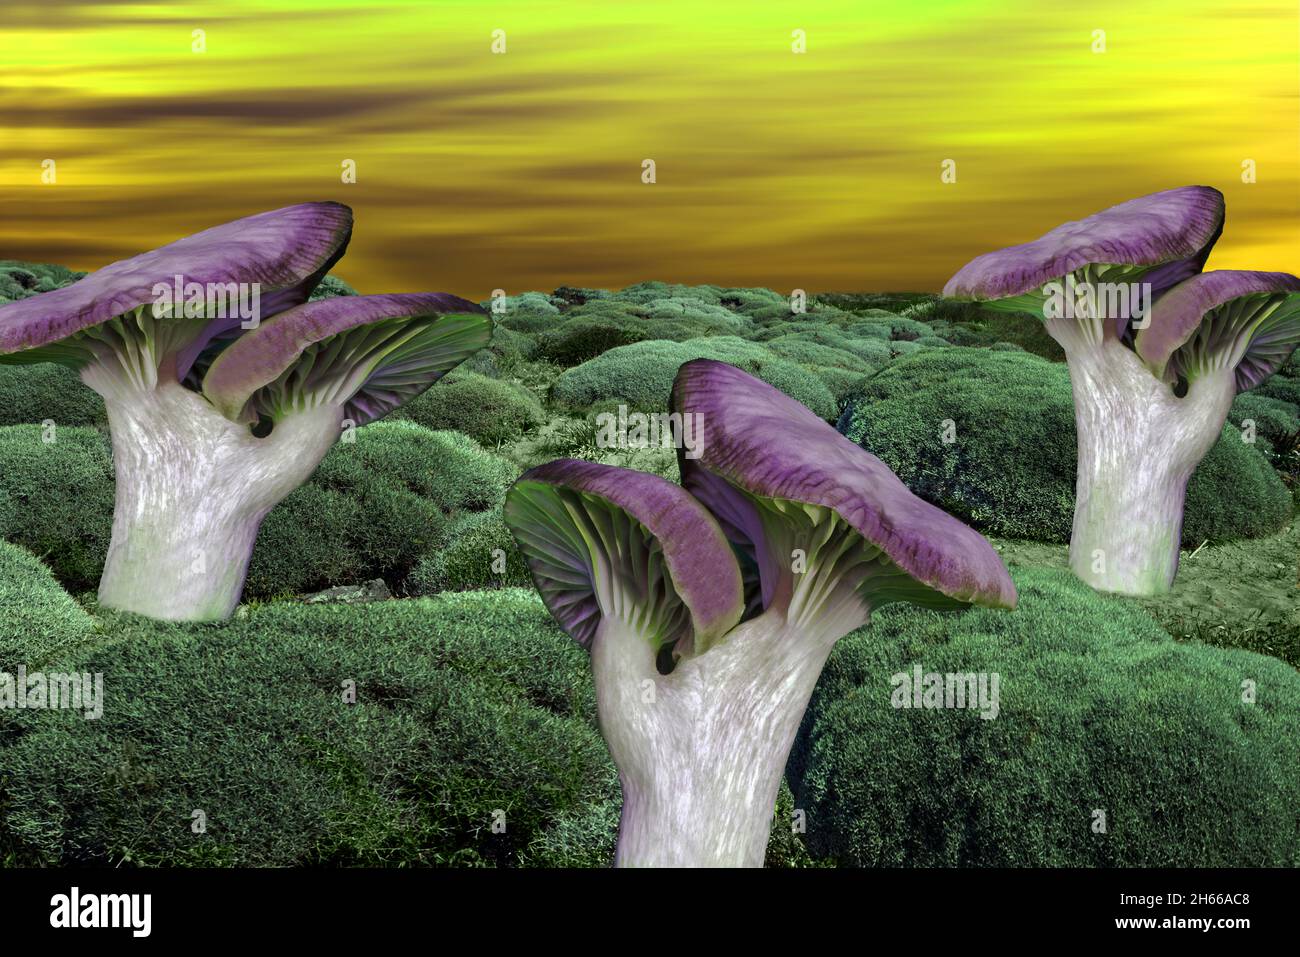 A fantasy image of giant fungi on an alien planet. The fungus is based on an unusual double capped version of Cuphophyllus flavipes. Stock Photo